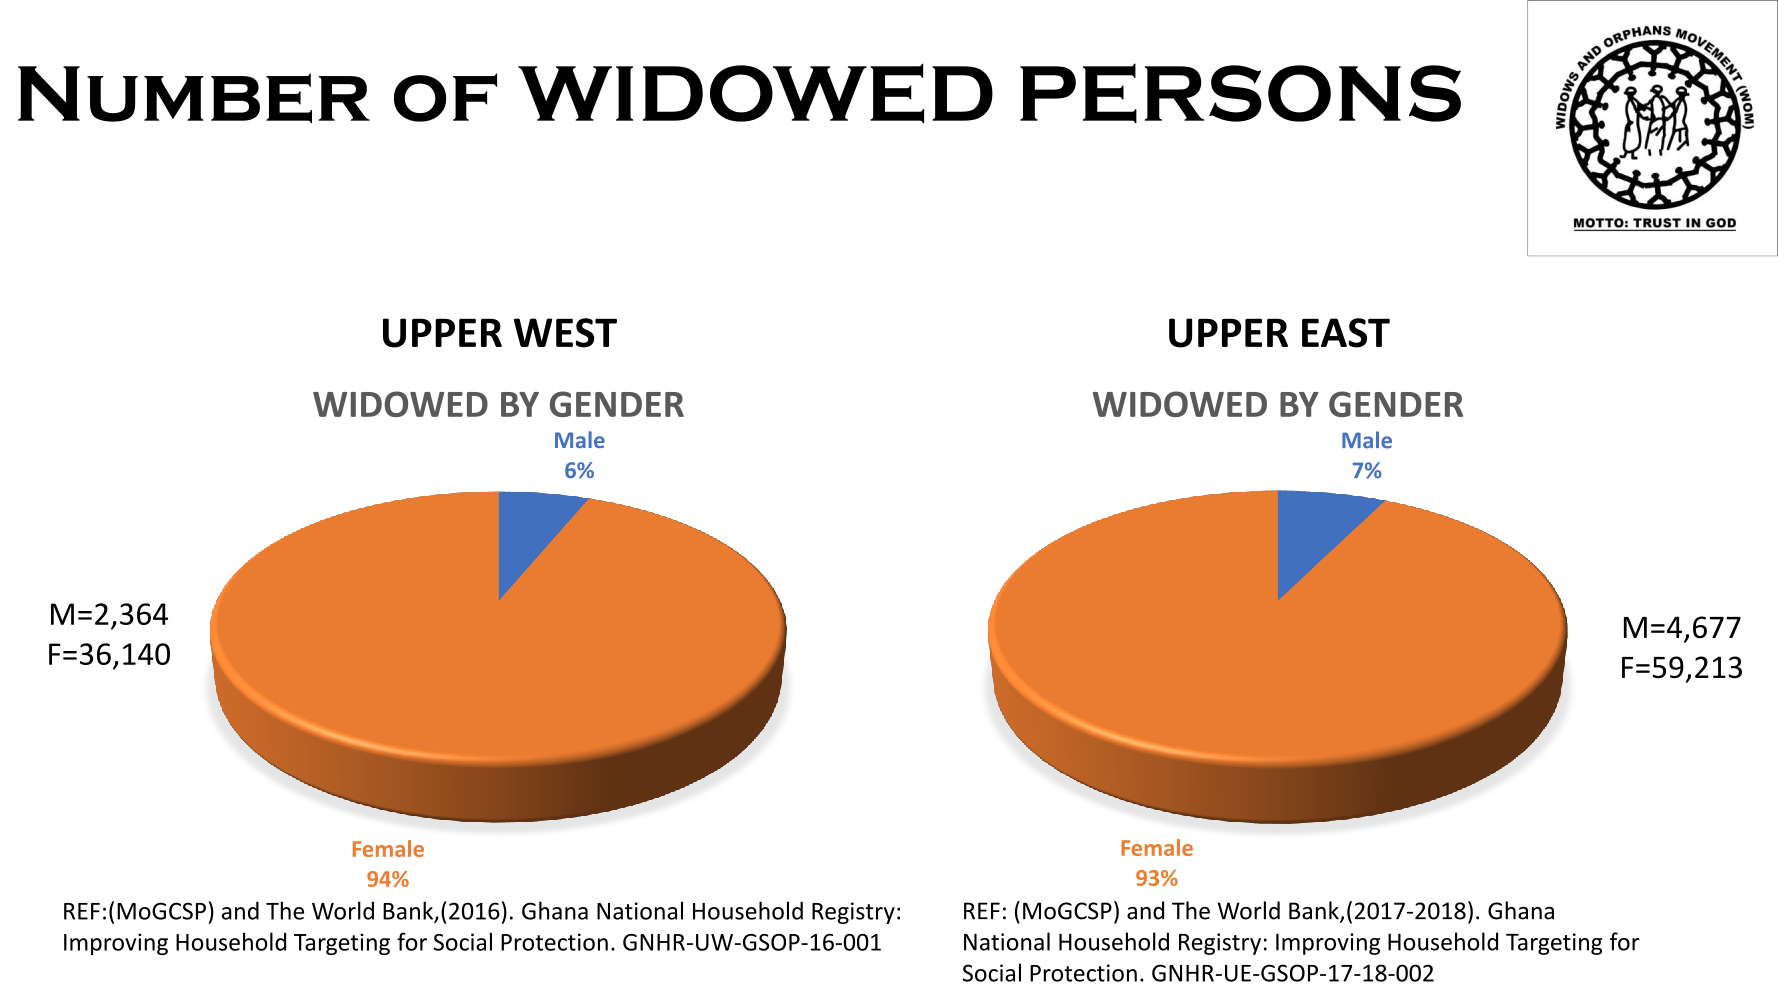 Graphical Statistics of Widows in Ghana per GNH registry